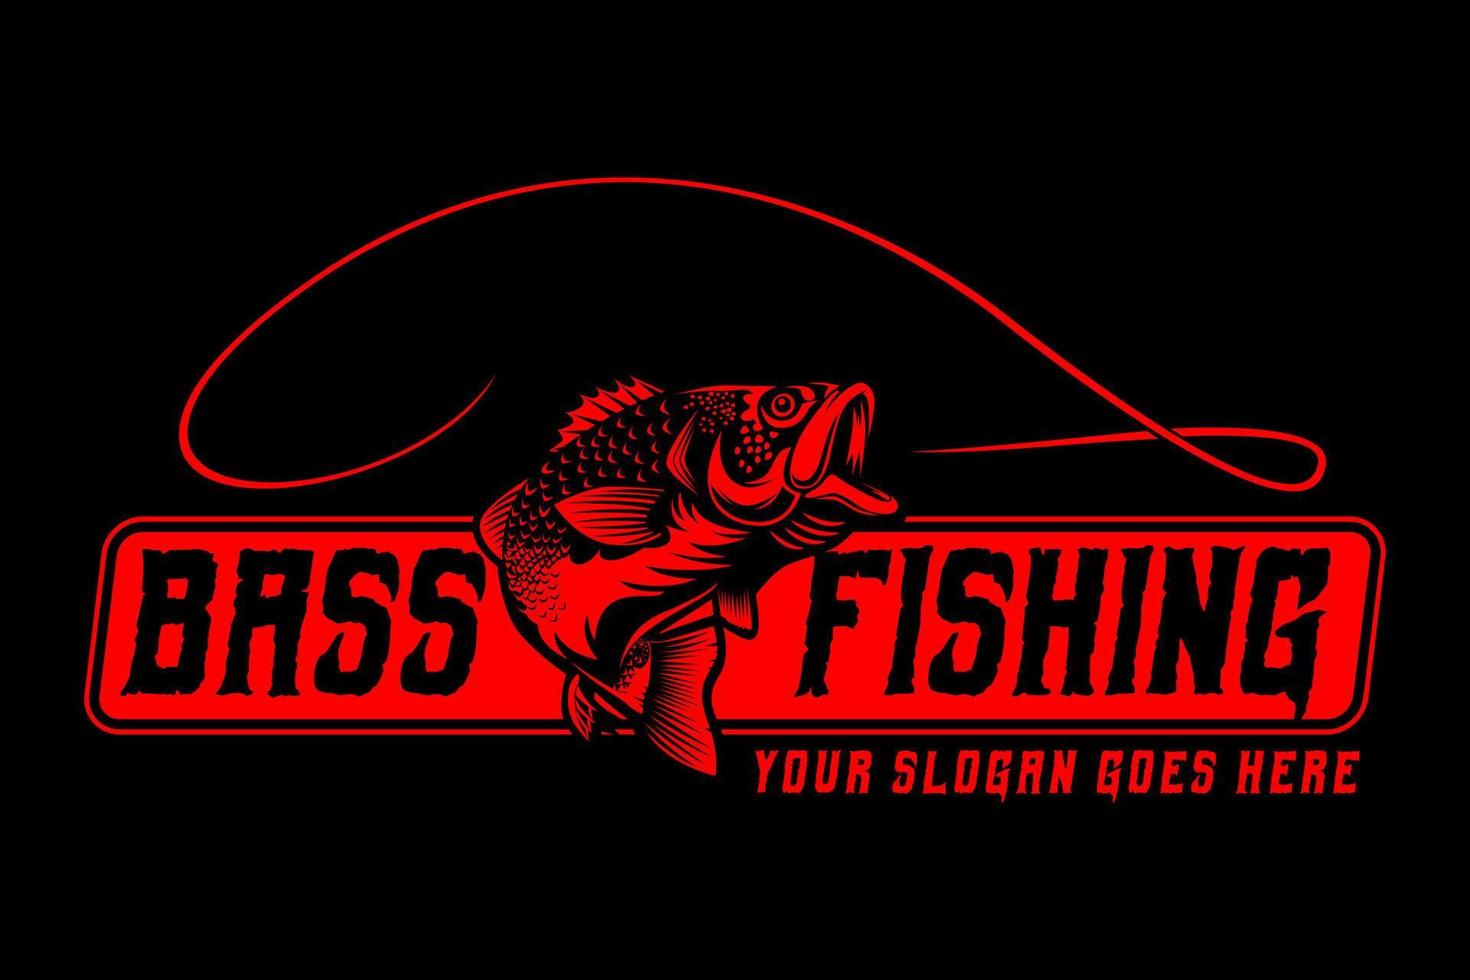 Jumping Bass fish fishing logo on black dark background. modern vintage rustic logo design. great to use as your any fishing company logo and brand vector